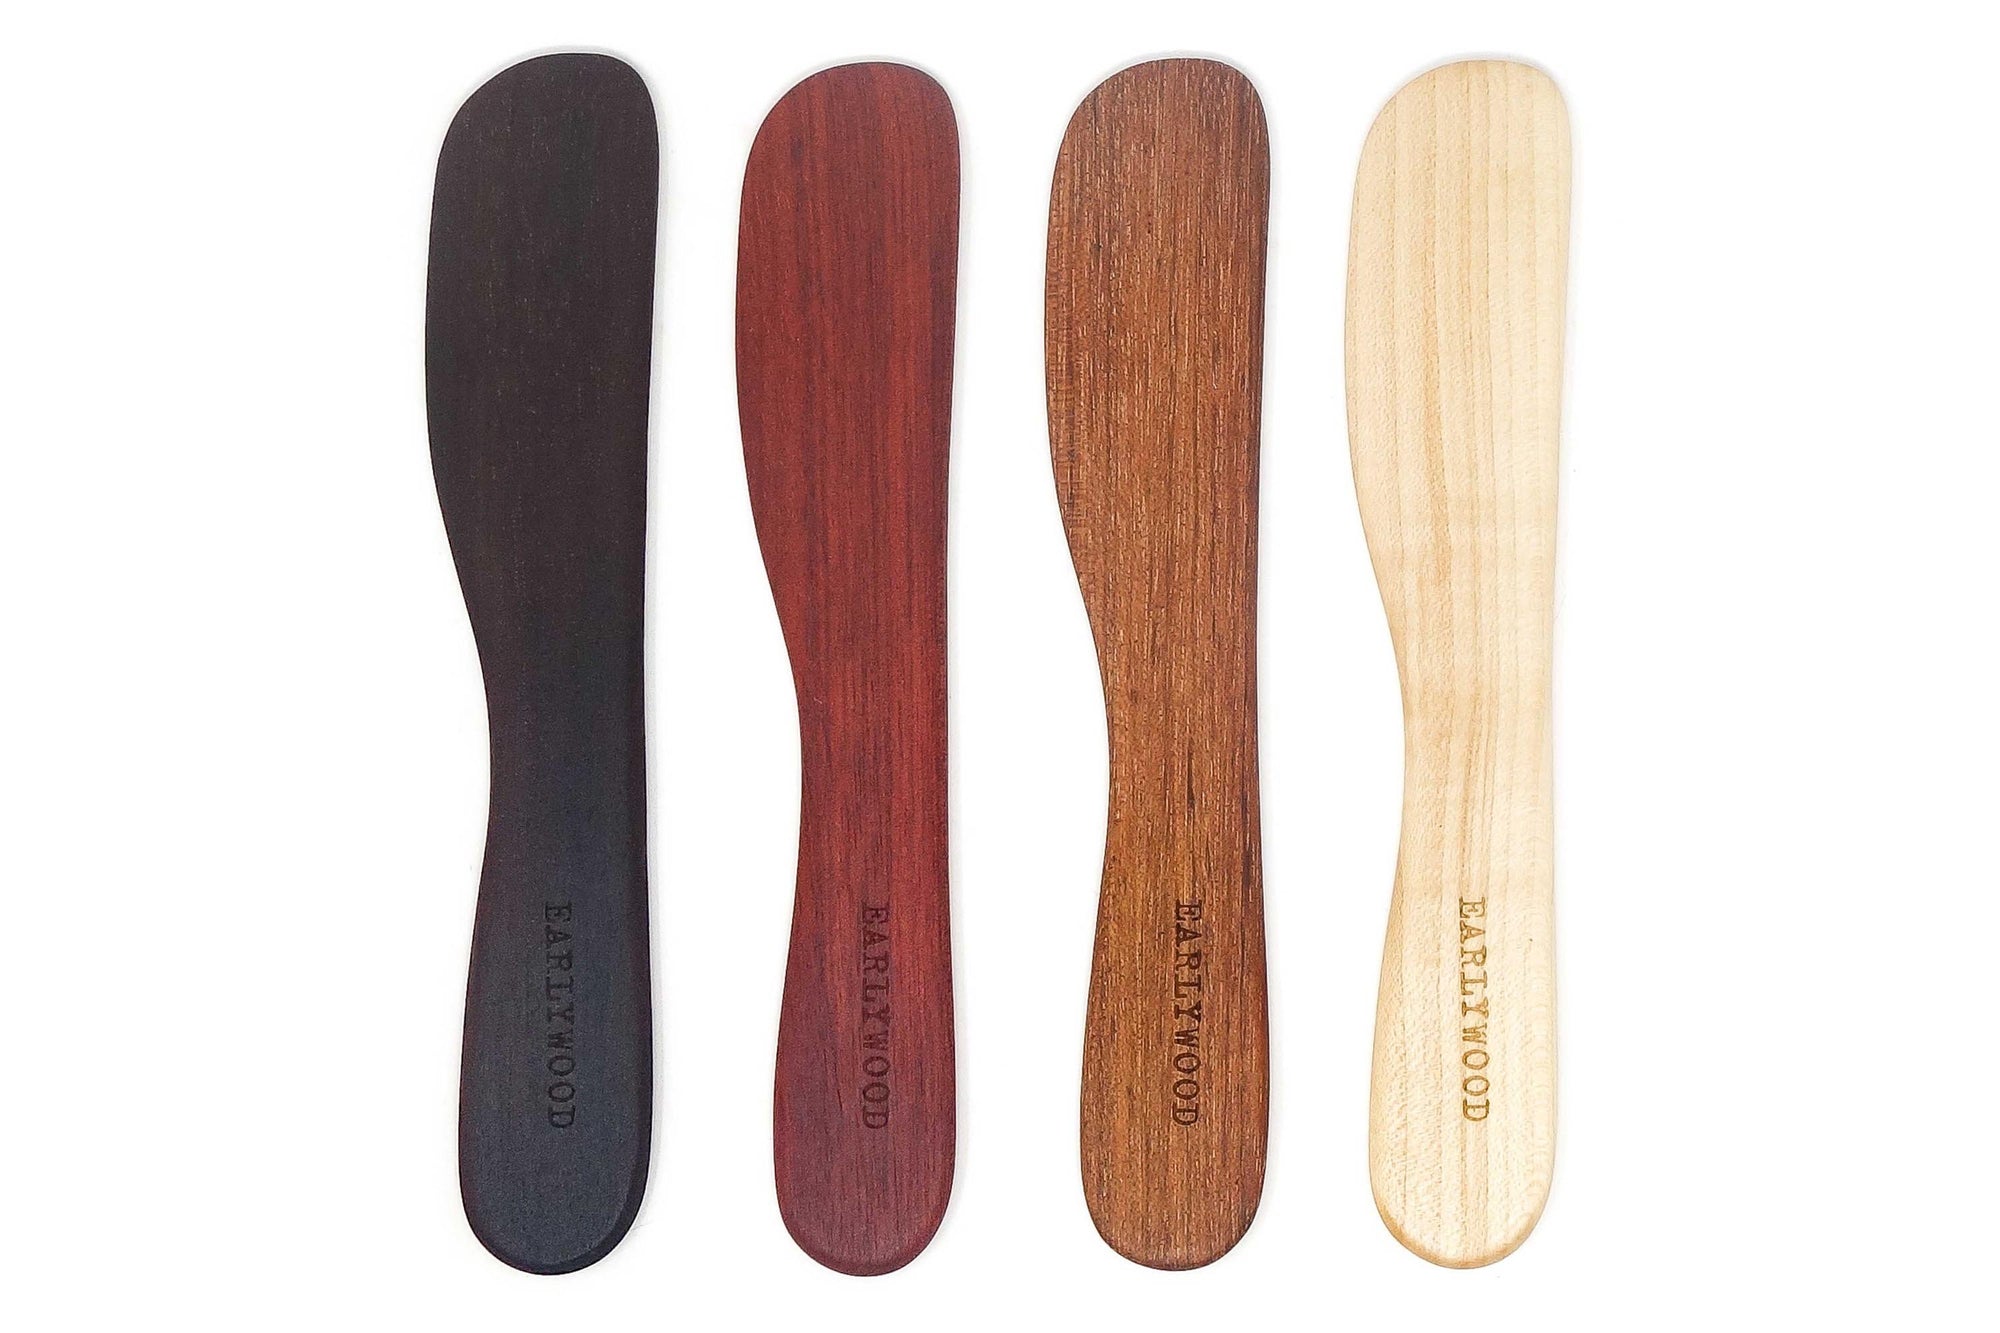 multicolored wood cheese knives set of 4 by Earlywood